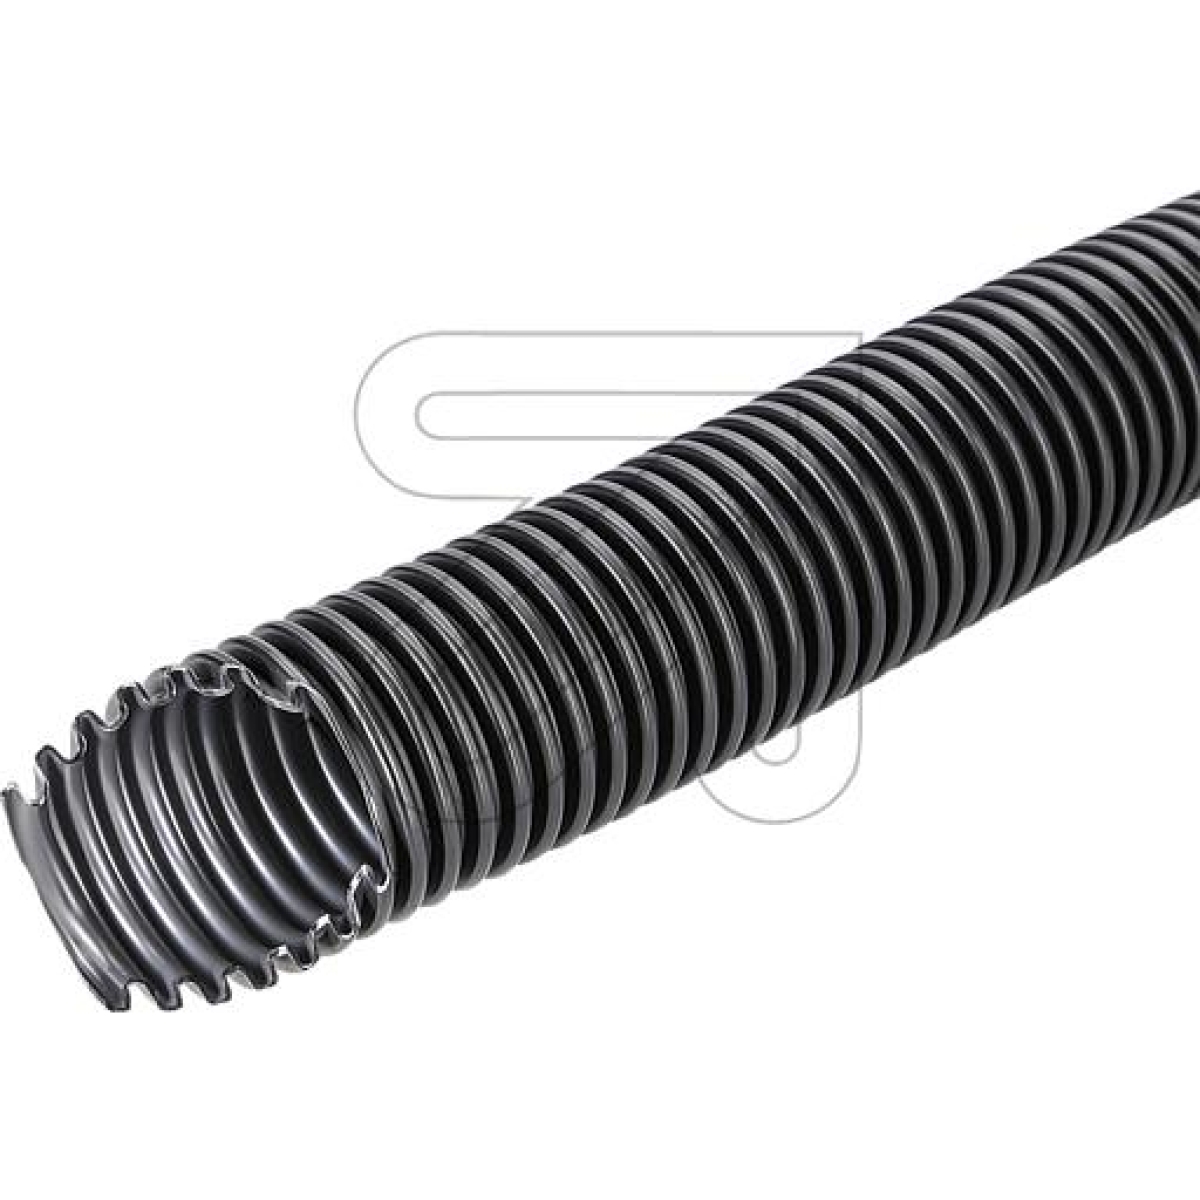 FRÄNKISCHEFlexible pipe FBY-EL-F 40 black-Price for 25 pcs.Article-No: 199850